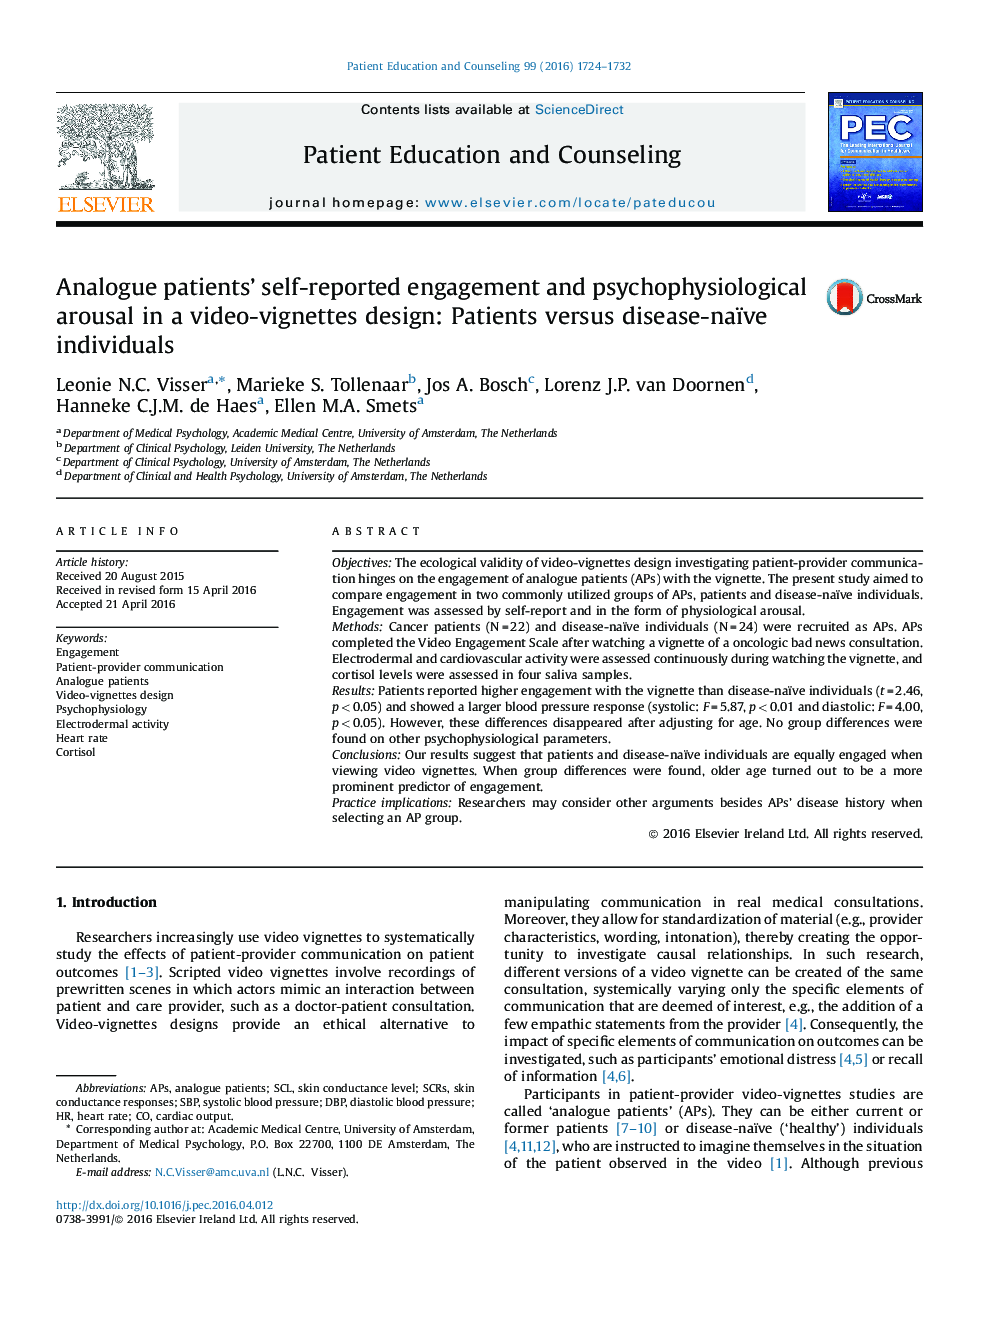 Analogue patients’ self-reported engagement and psychophysiological arousal in a video-vignettes design: Patients versus disease-naïve individuals